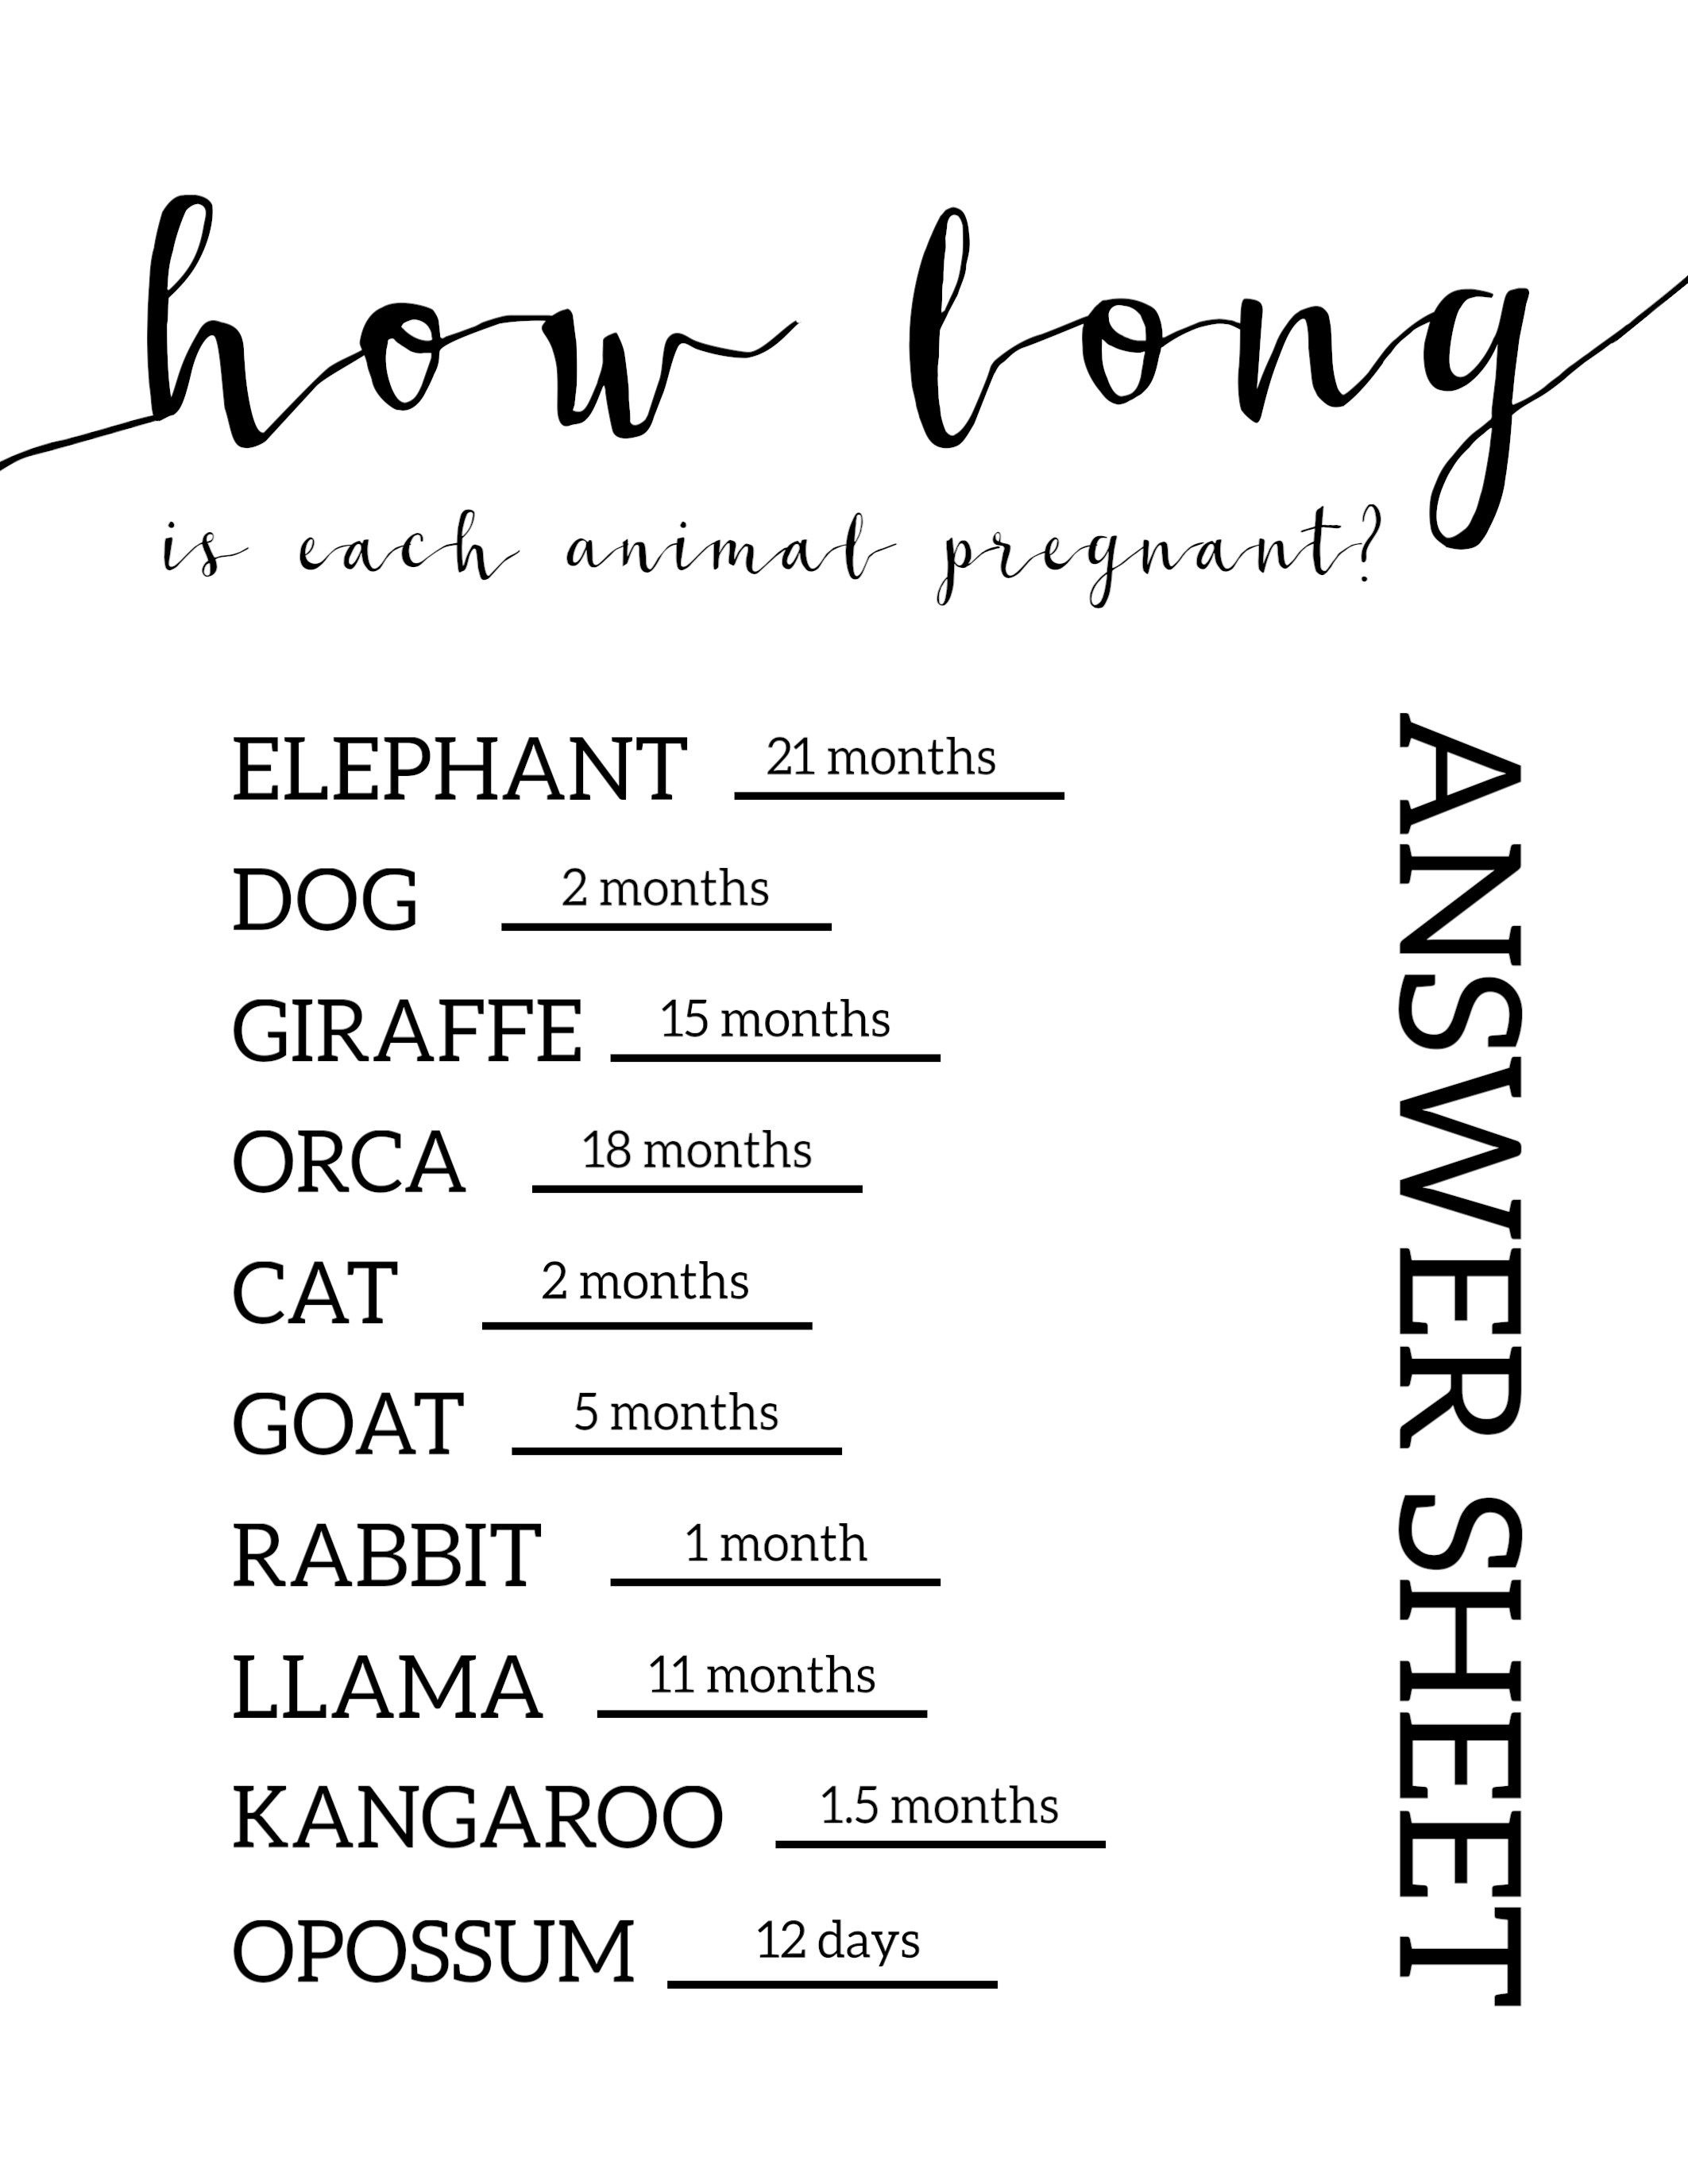 Free Baby Shower Games Printable {Animal Pregnancies} | Baby Shower - Free Printable Baby Shower Games With Answers